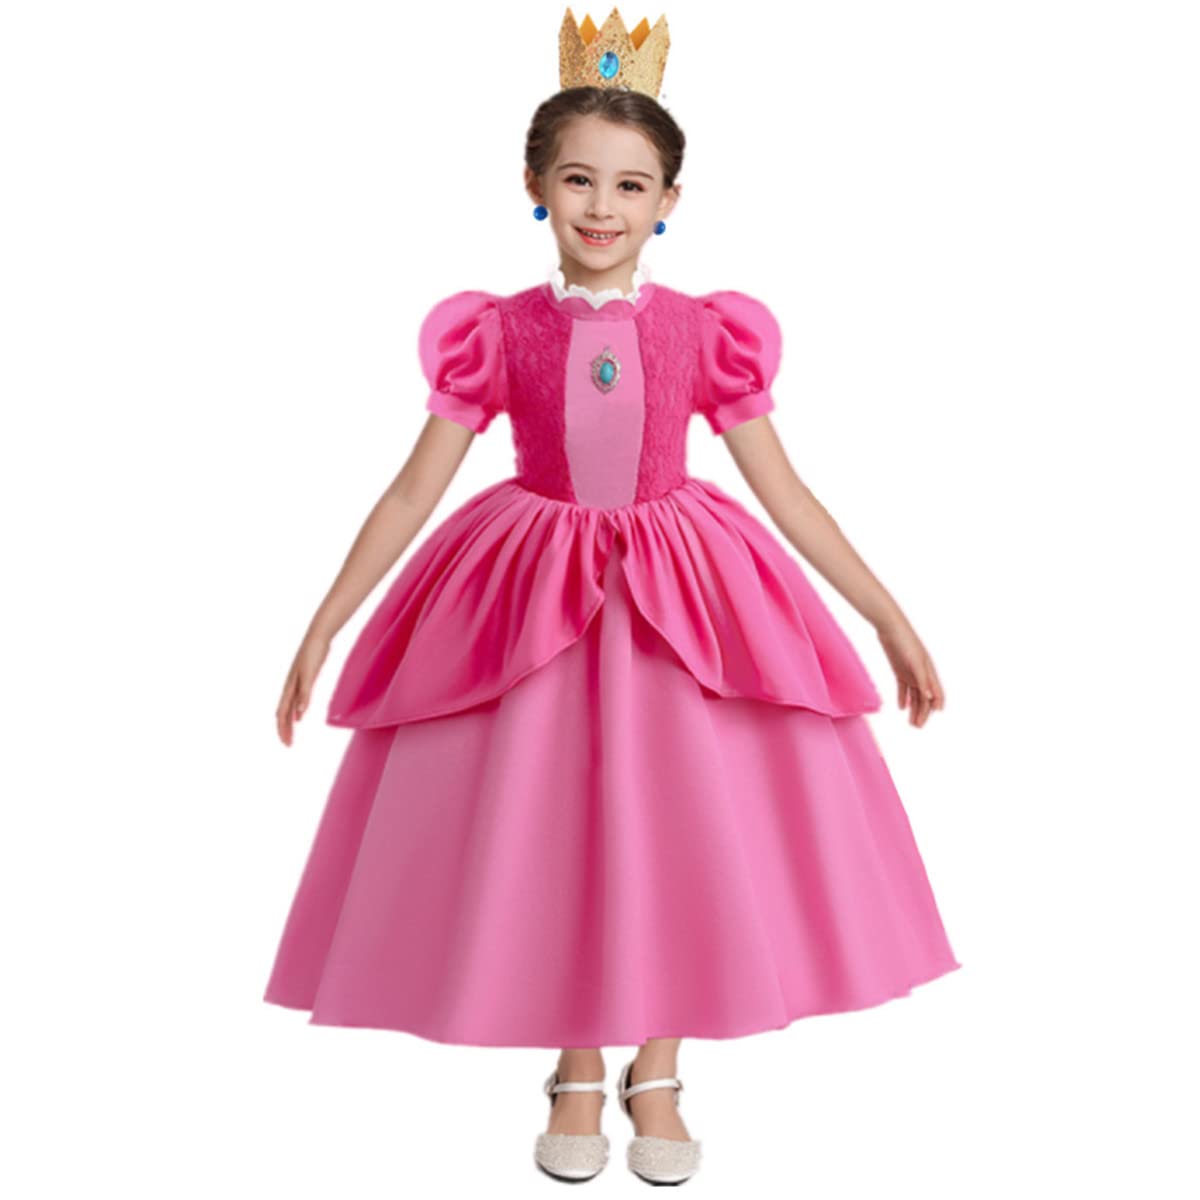 Xefenki Princess Peach Cosplay Costume for Girls Kids,Princess Peach Dress With Accessories Crown and Earrings